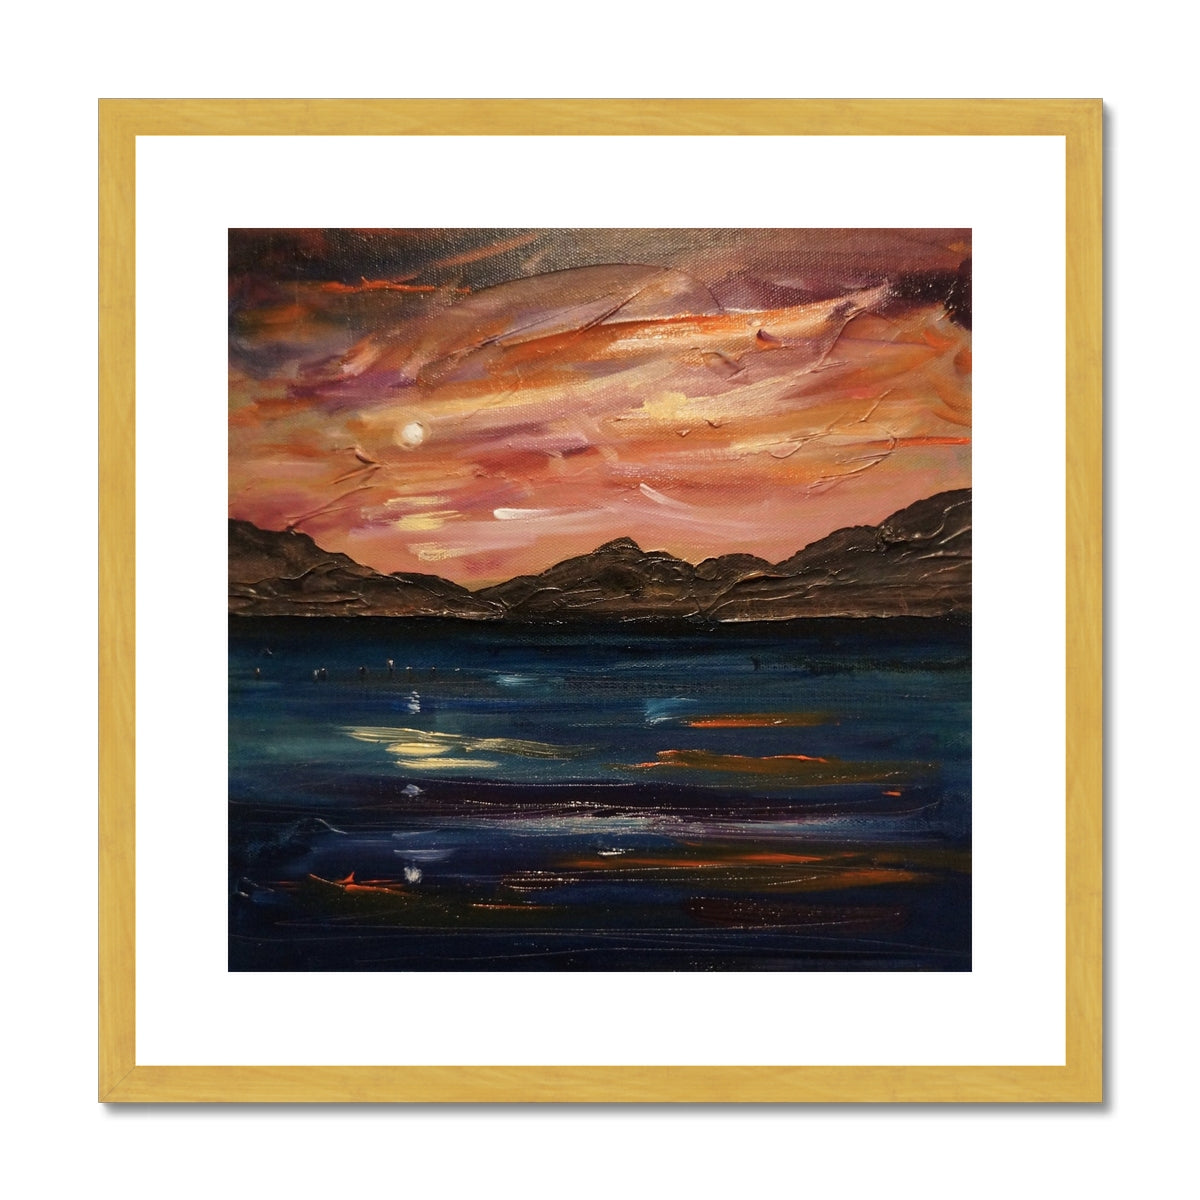 Loch Ness Moonset Painting | Antique Framed & Mounted Prints From Scotland-Antique Framed & Mounted Prints-Scottish Lochs & Mountains Art Gallery-20"x20"-Gold Frame-Paintings, Prints, Homeware, Art Gifts From Scotland By Scottish Artist Kevin Hunter